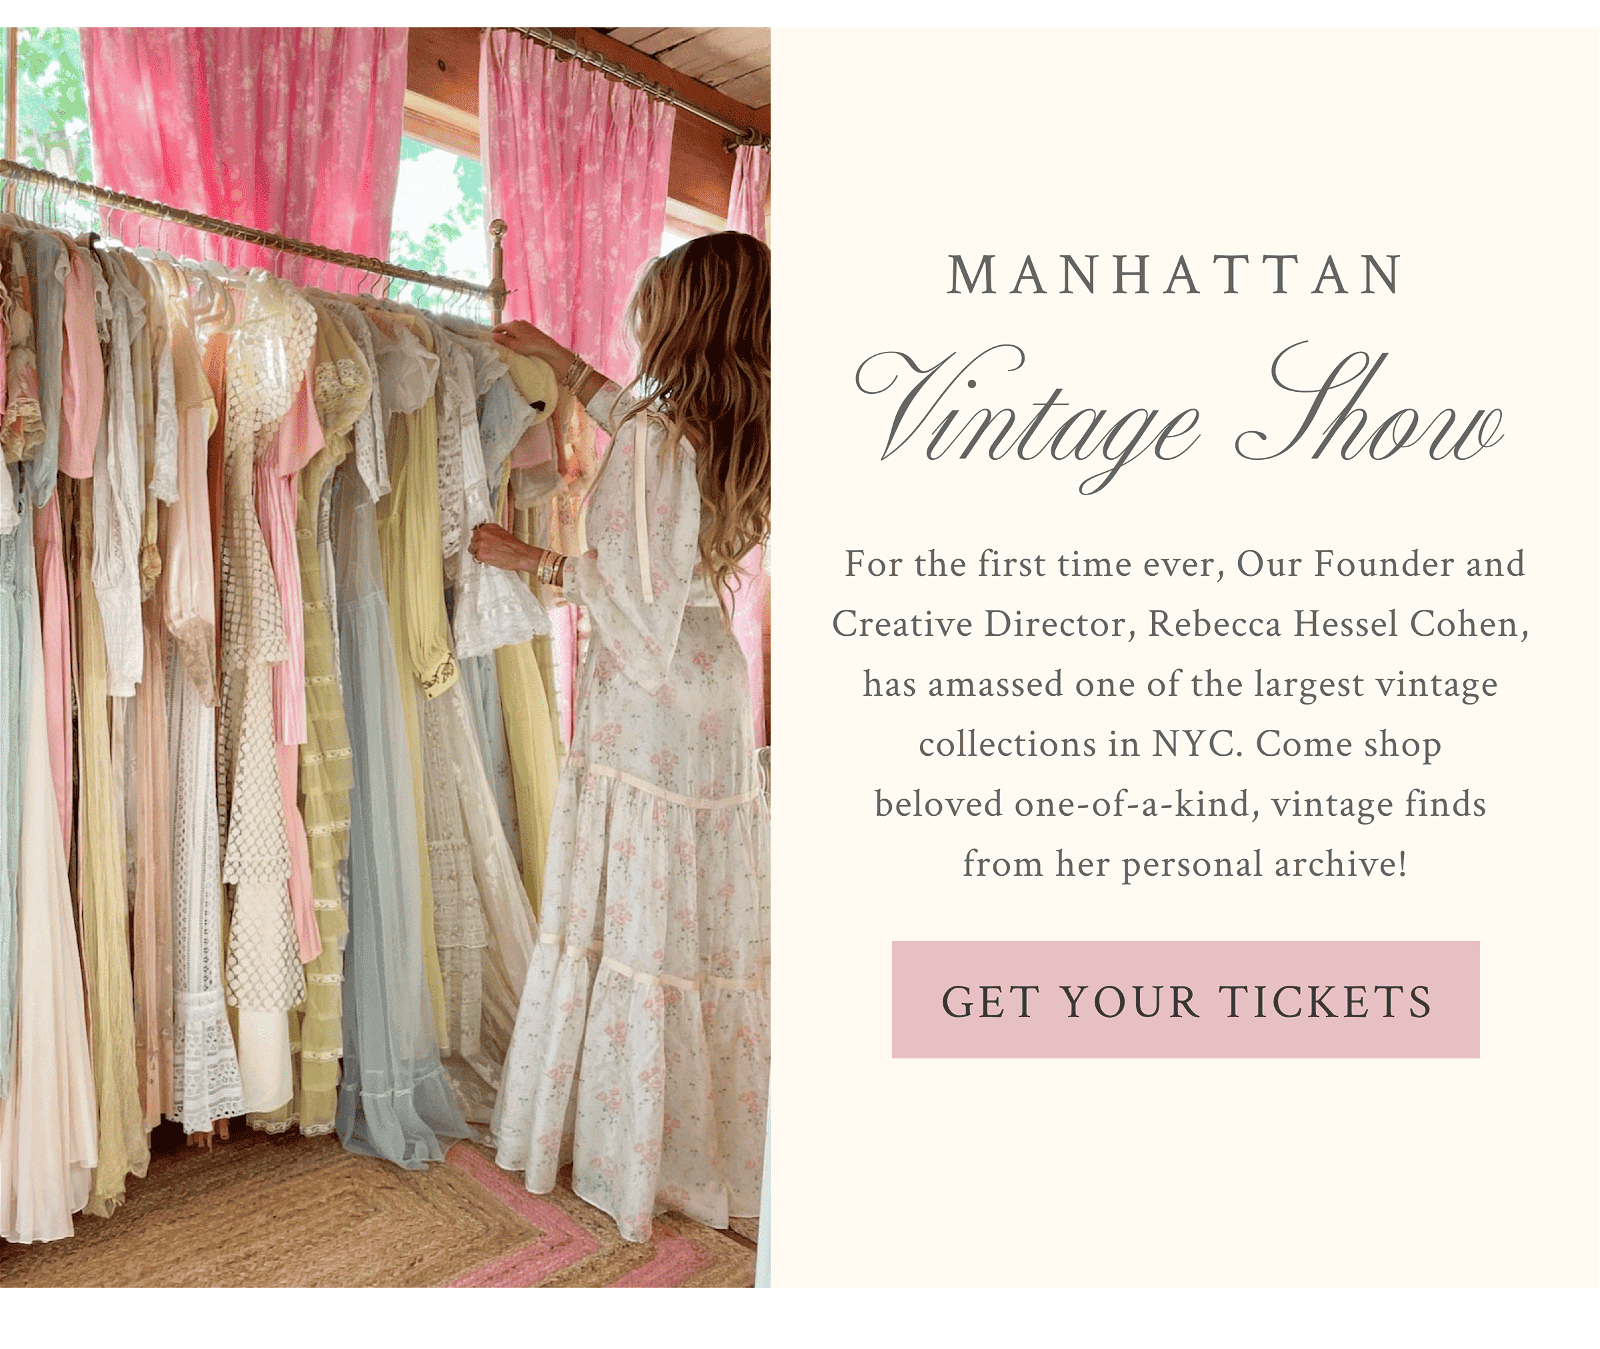 Vintage Show - For the first time ever, Our Founder and Creative Director, Rebecca Hessel Cohen, has amassed one of the largest vintage collections in NYC. Come shop beloved one-of-a-kind, vintage finds from her personal archive!